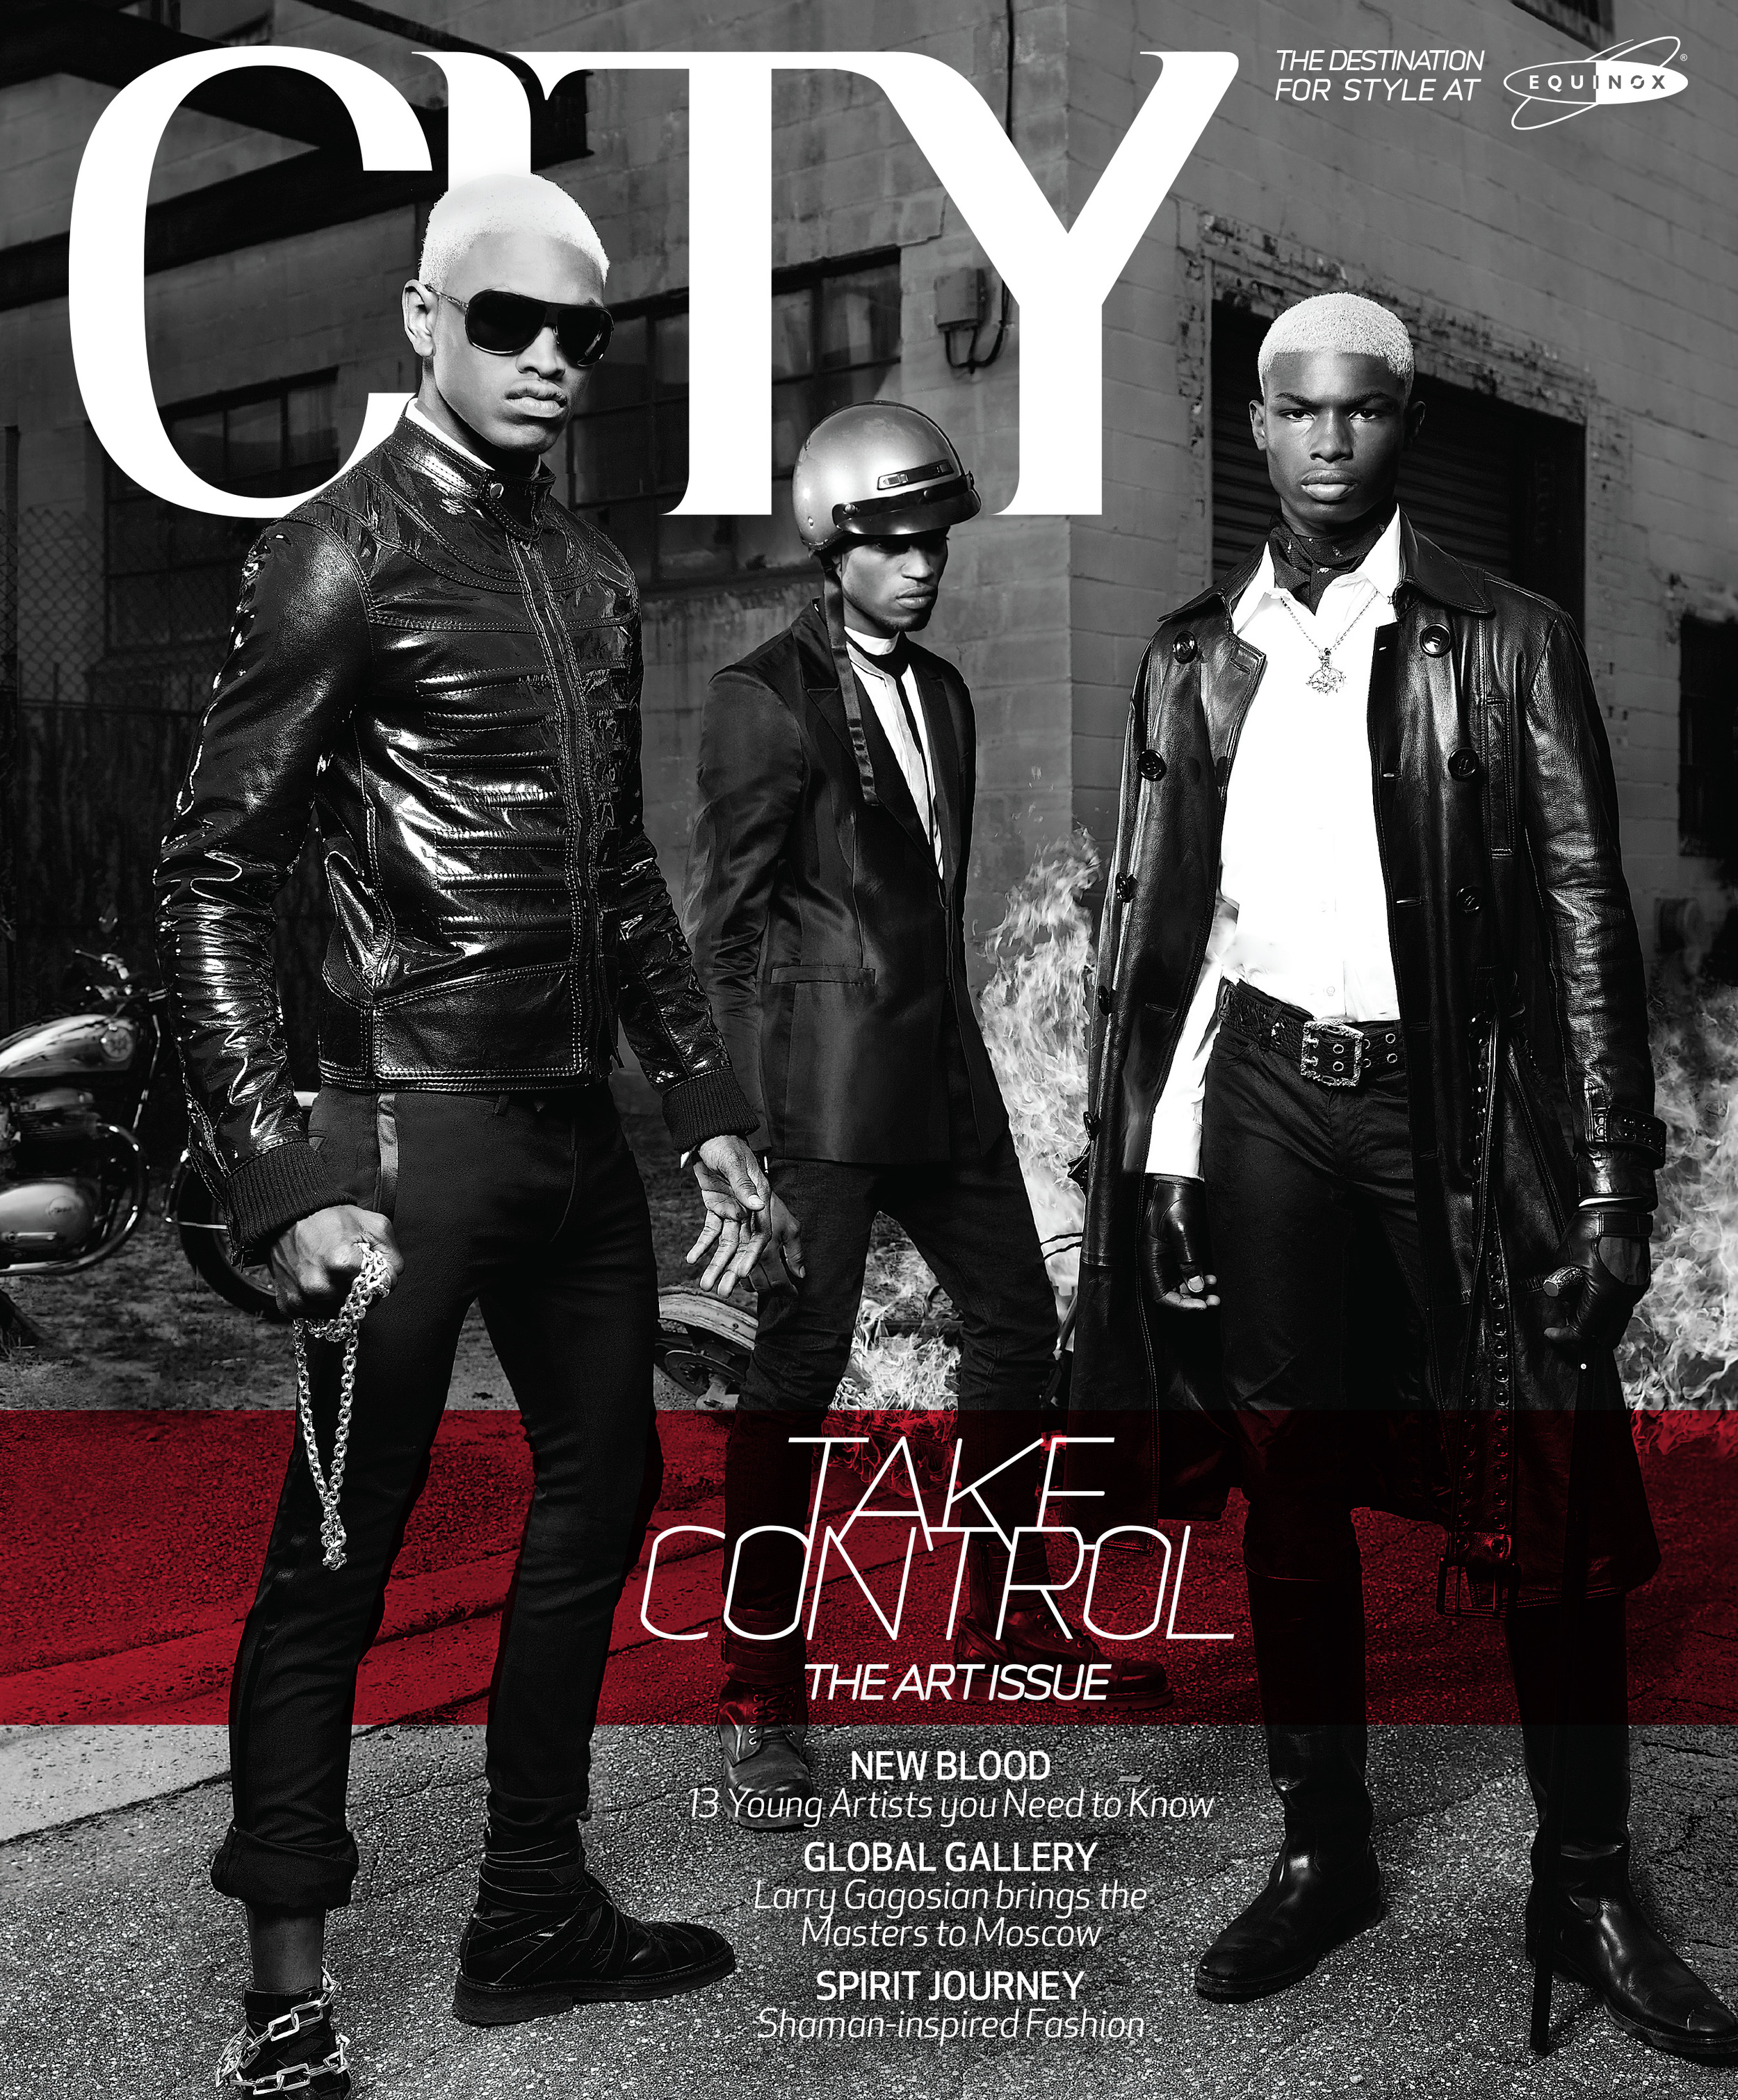  Sample CITY Cover including Equinox branding as the magazine was available in all nationwide Equinox fitness clubs. 2008. 